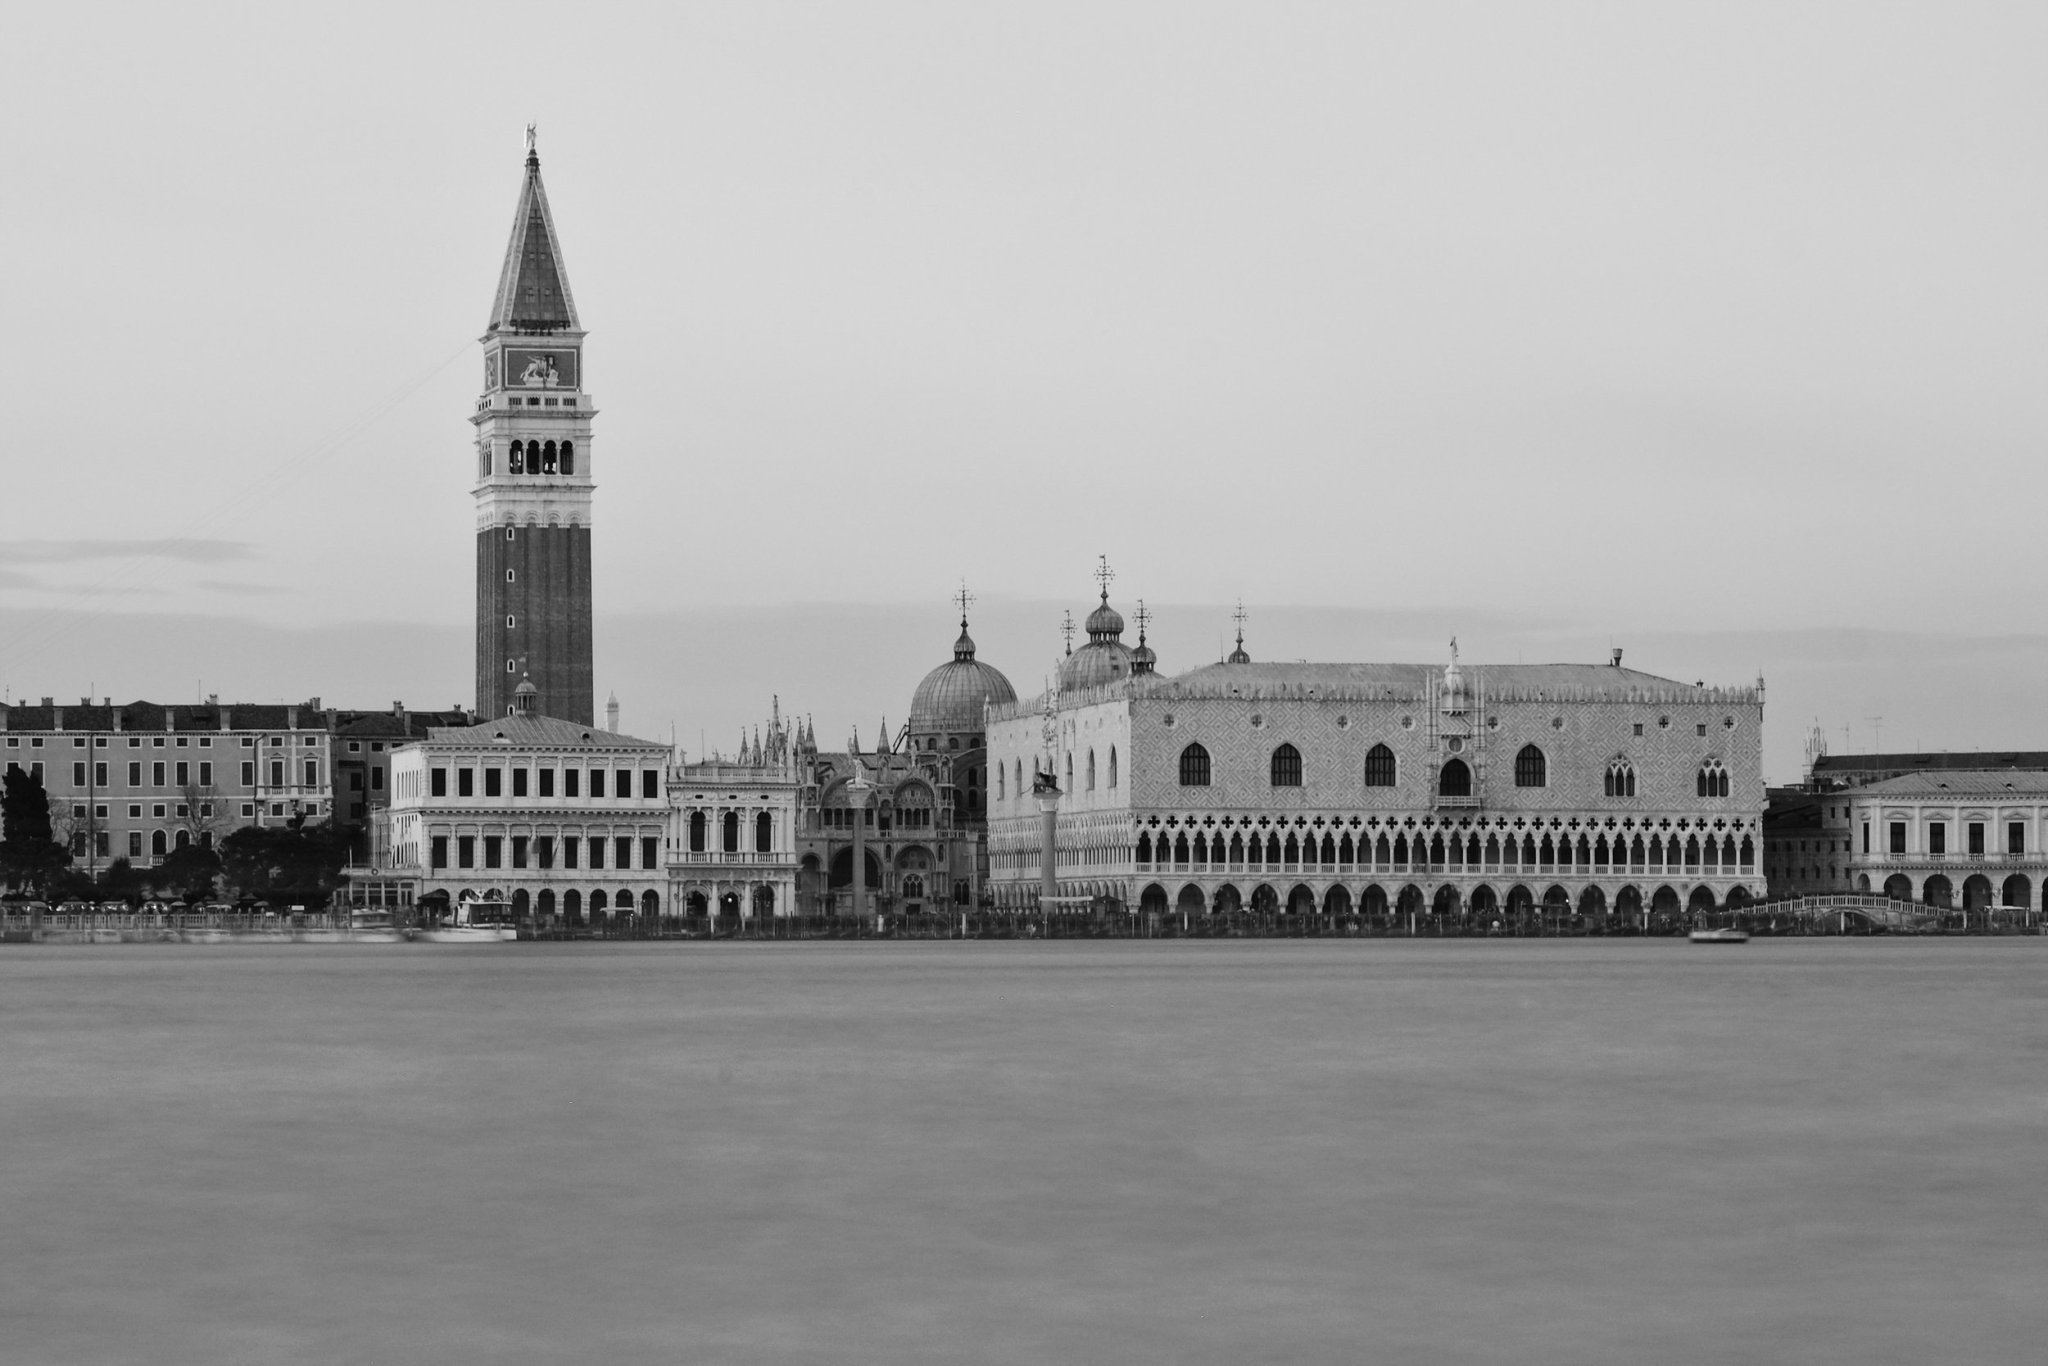 Venice Photo Tour and workshops by Award Winner Photographer Marco Secchi